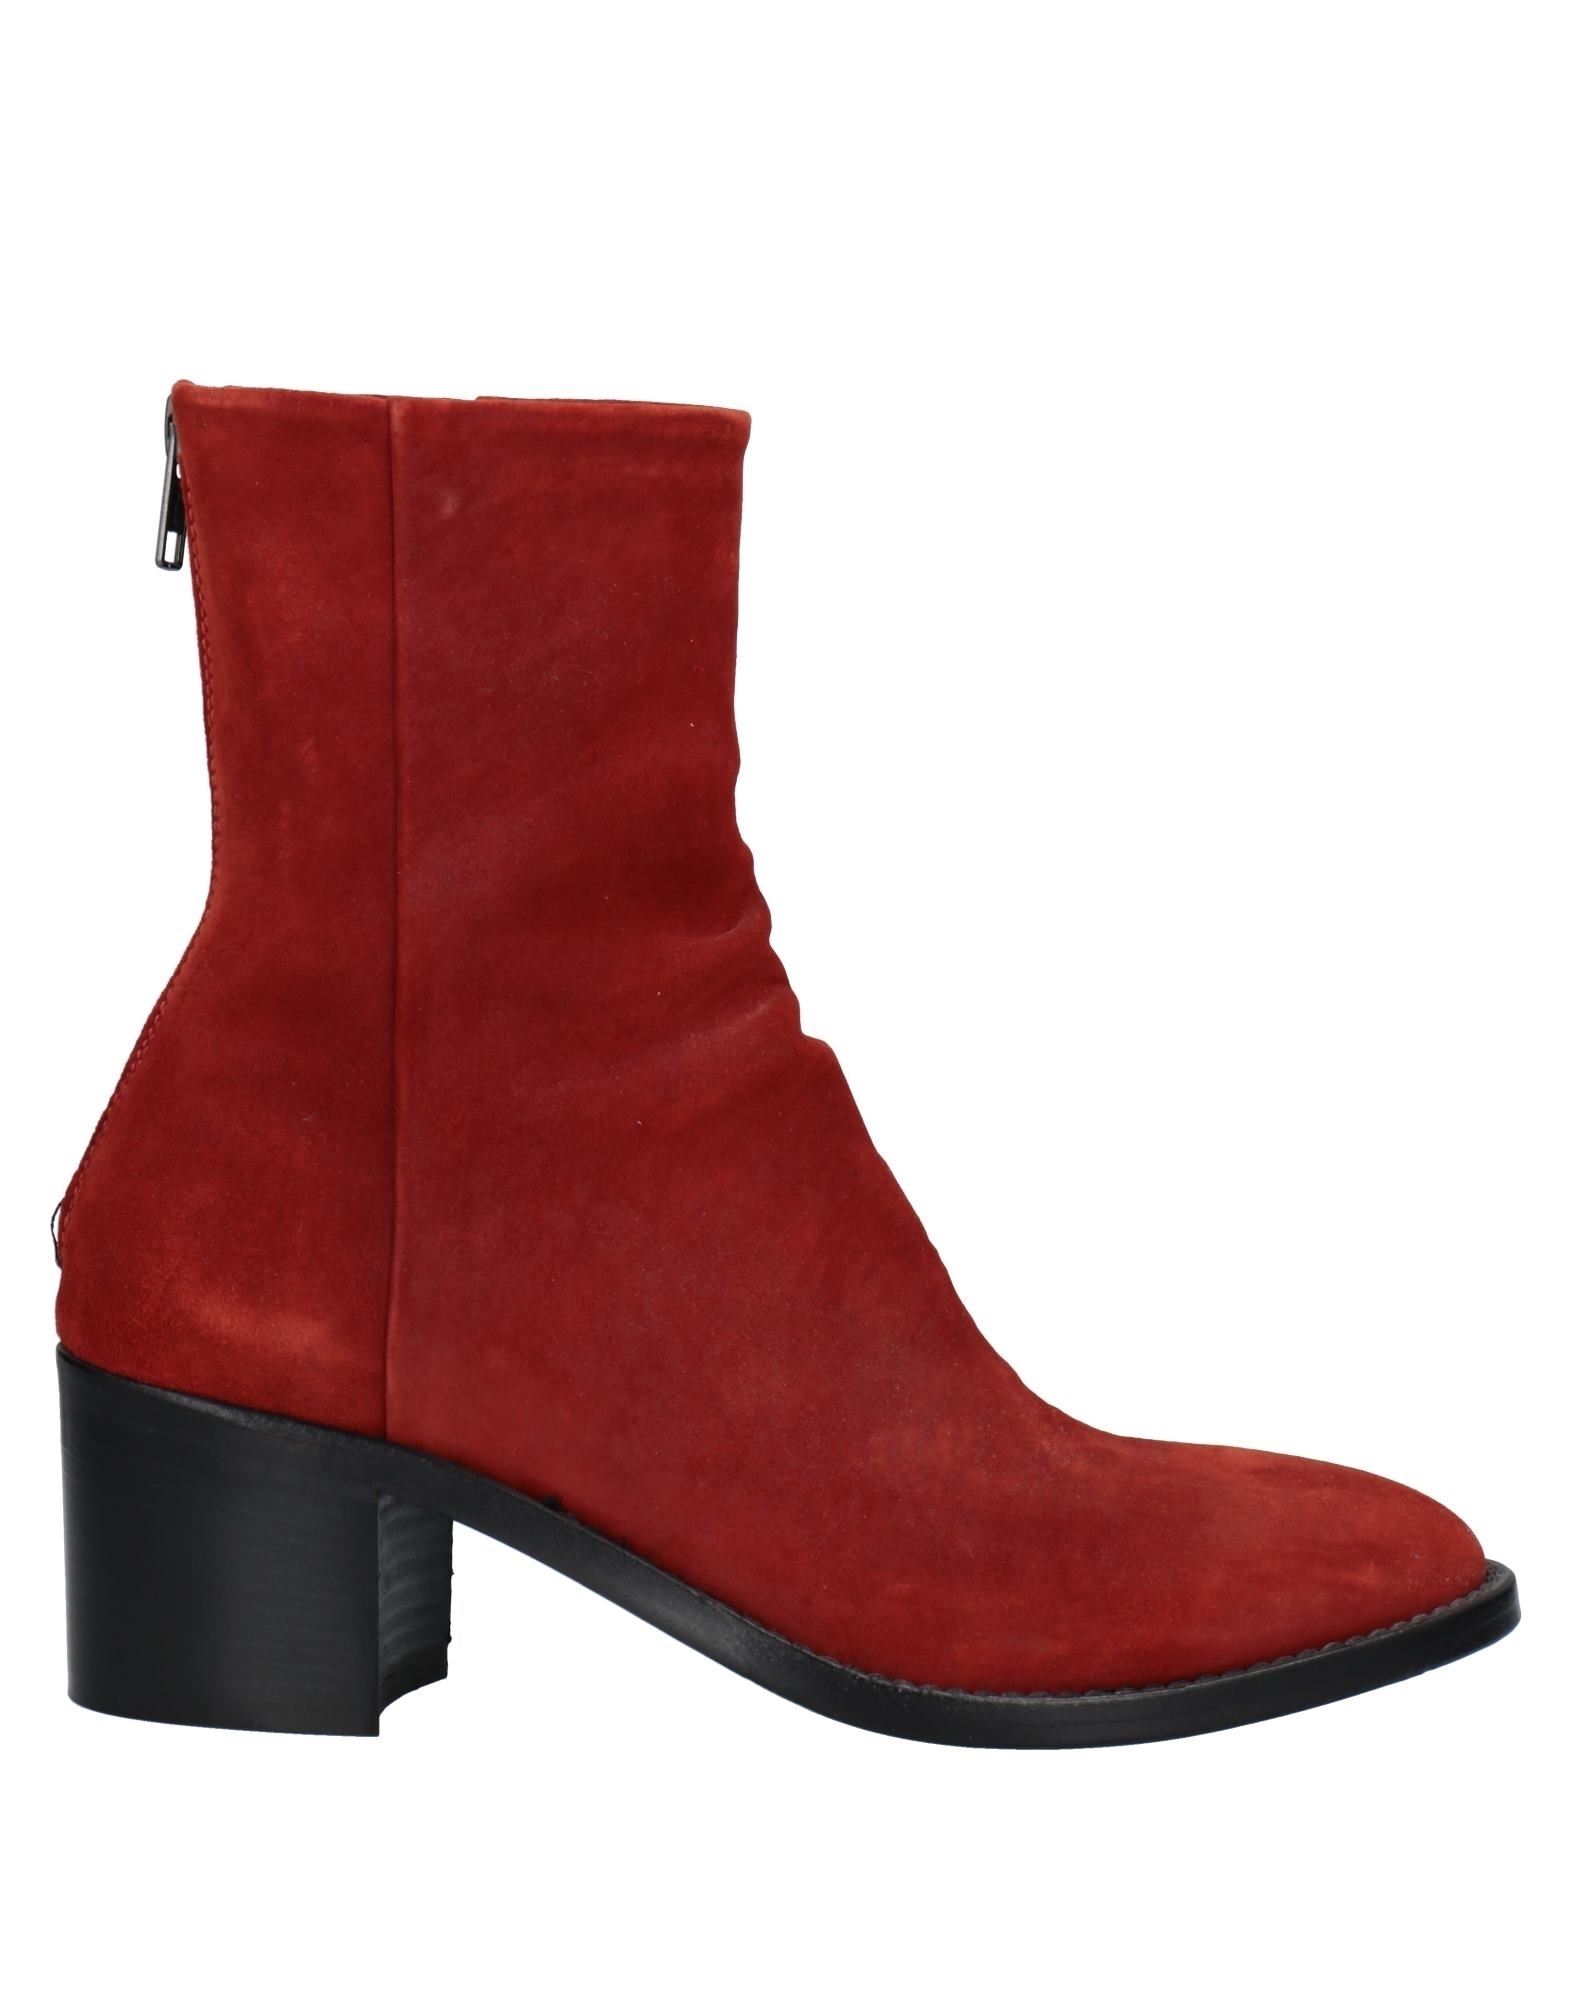 MICHELEDILOCO ANKLE BOOTS